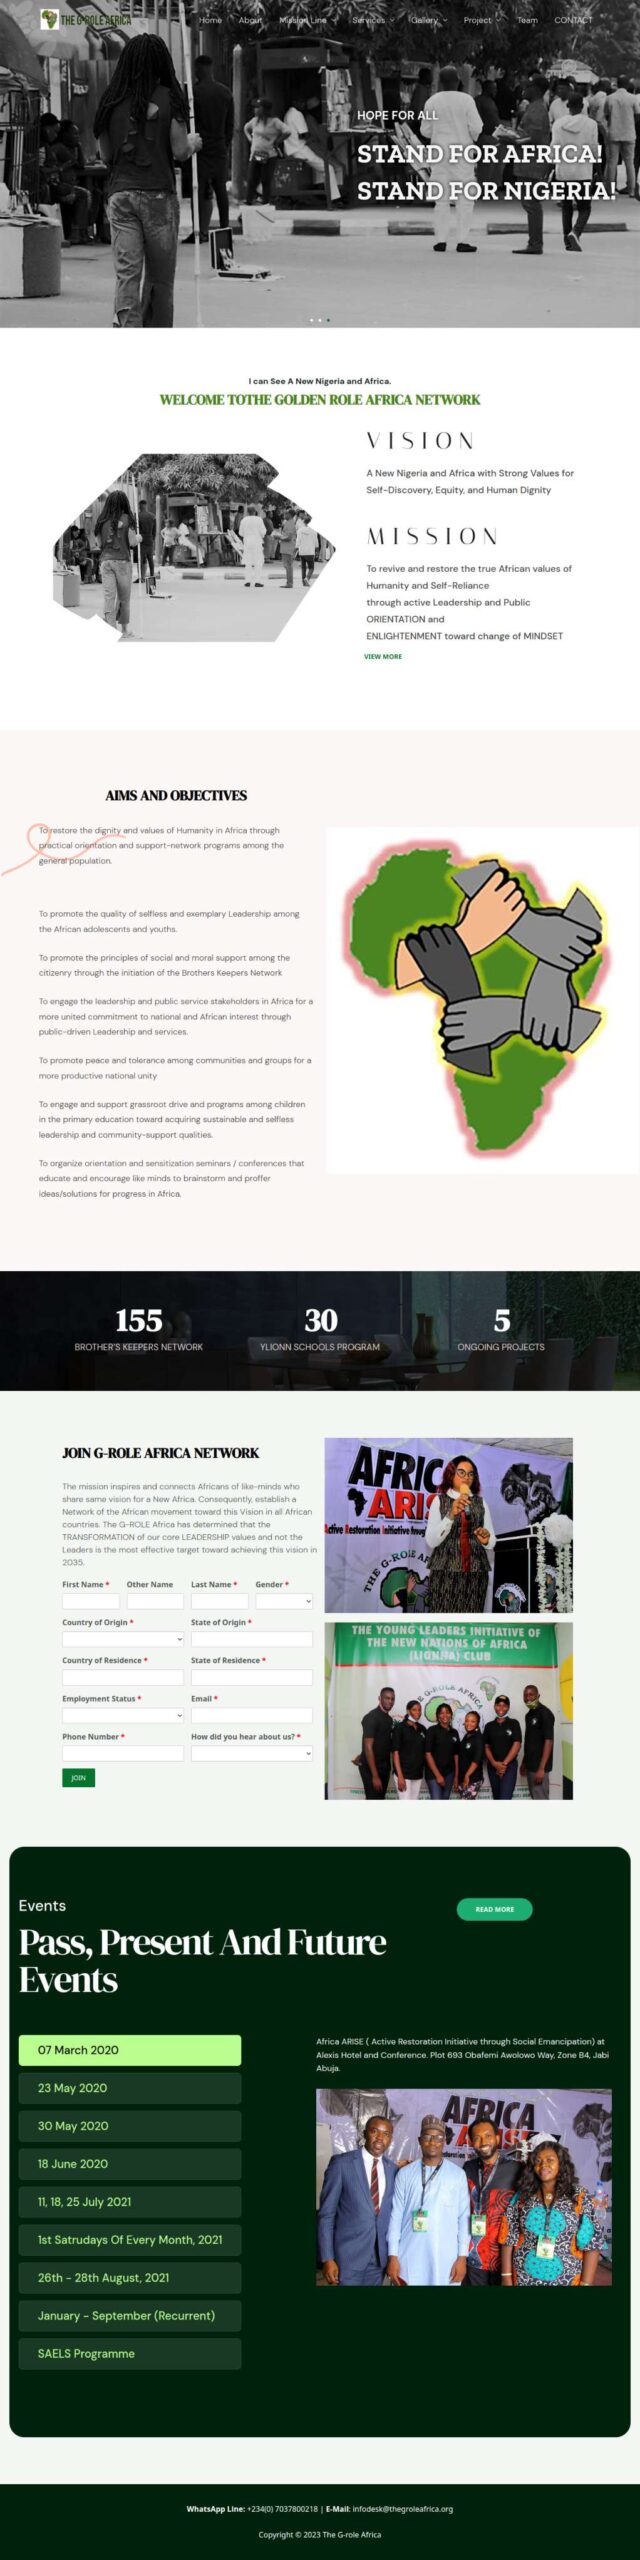 thegroleafrica-org